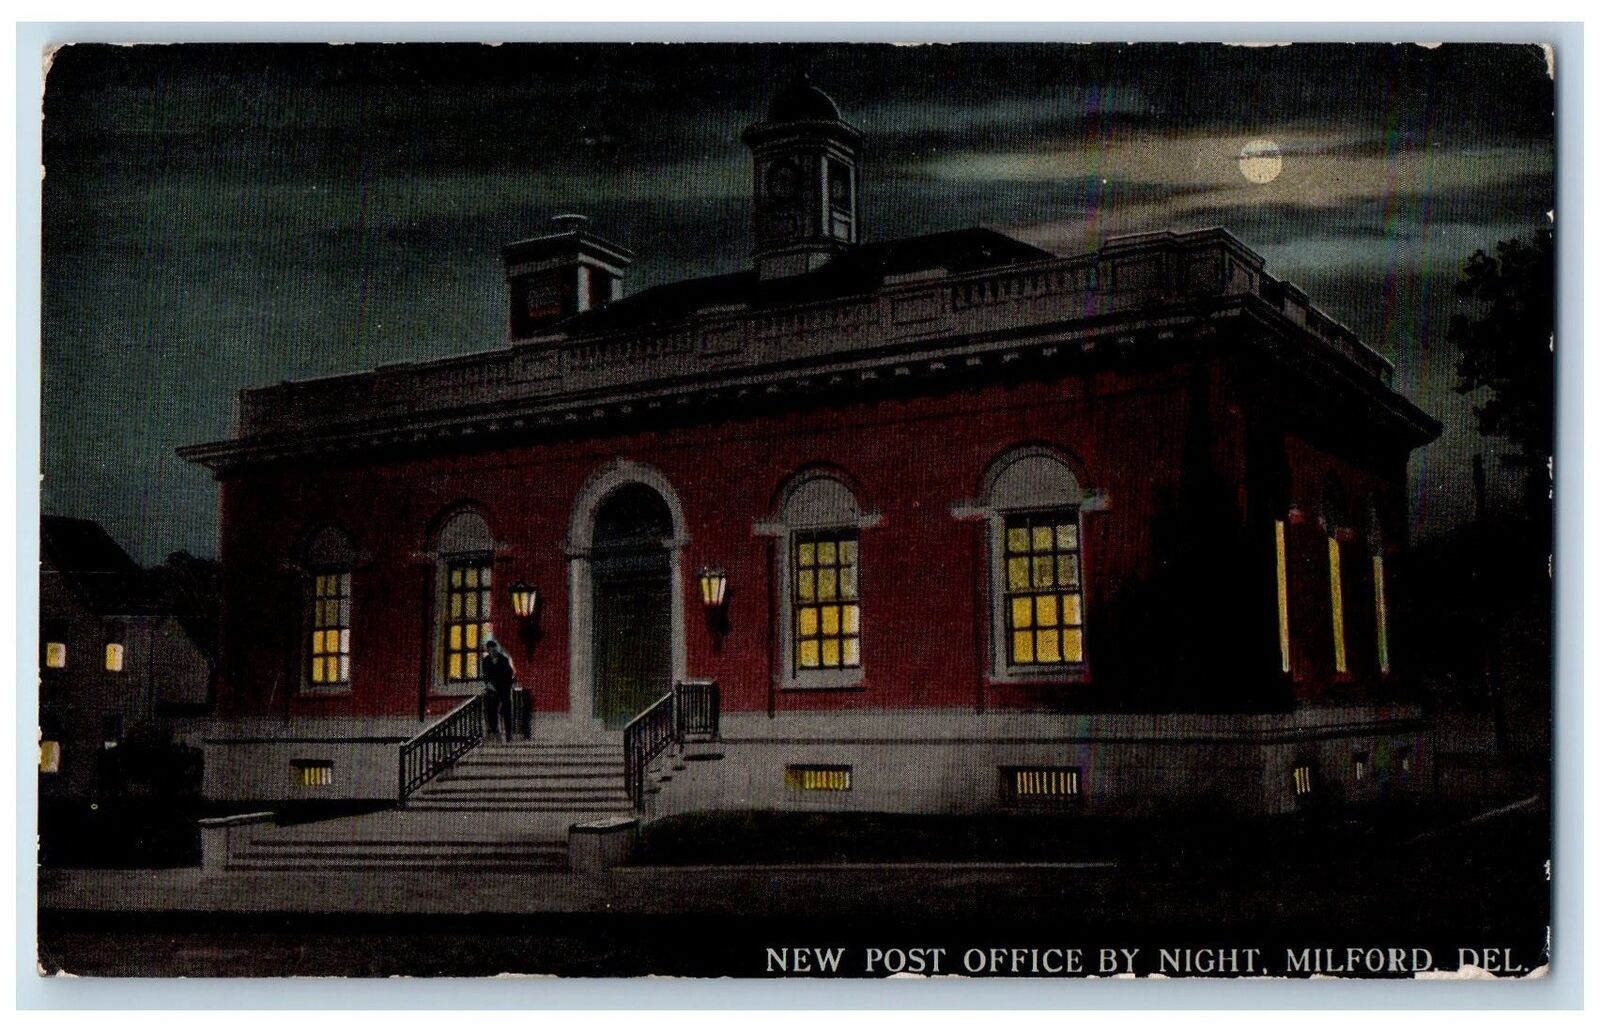 1912 Post Office By Night Moon Light Building Milford Delaware Antique Postcard